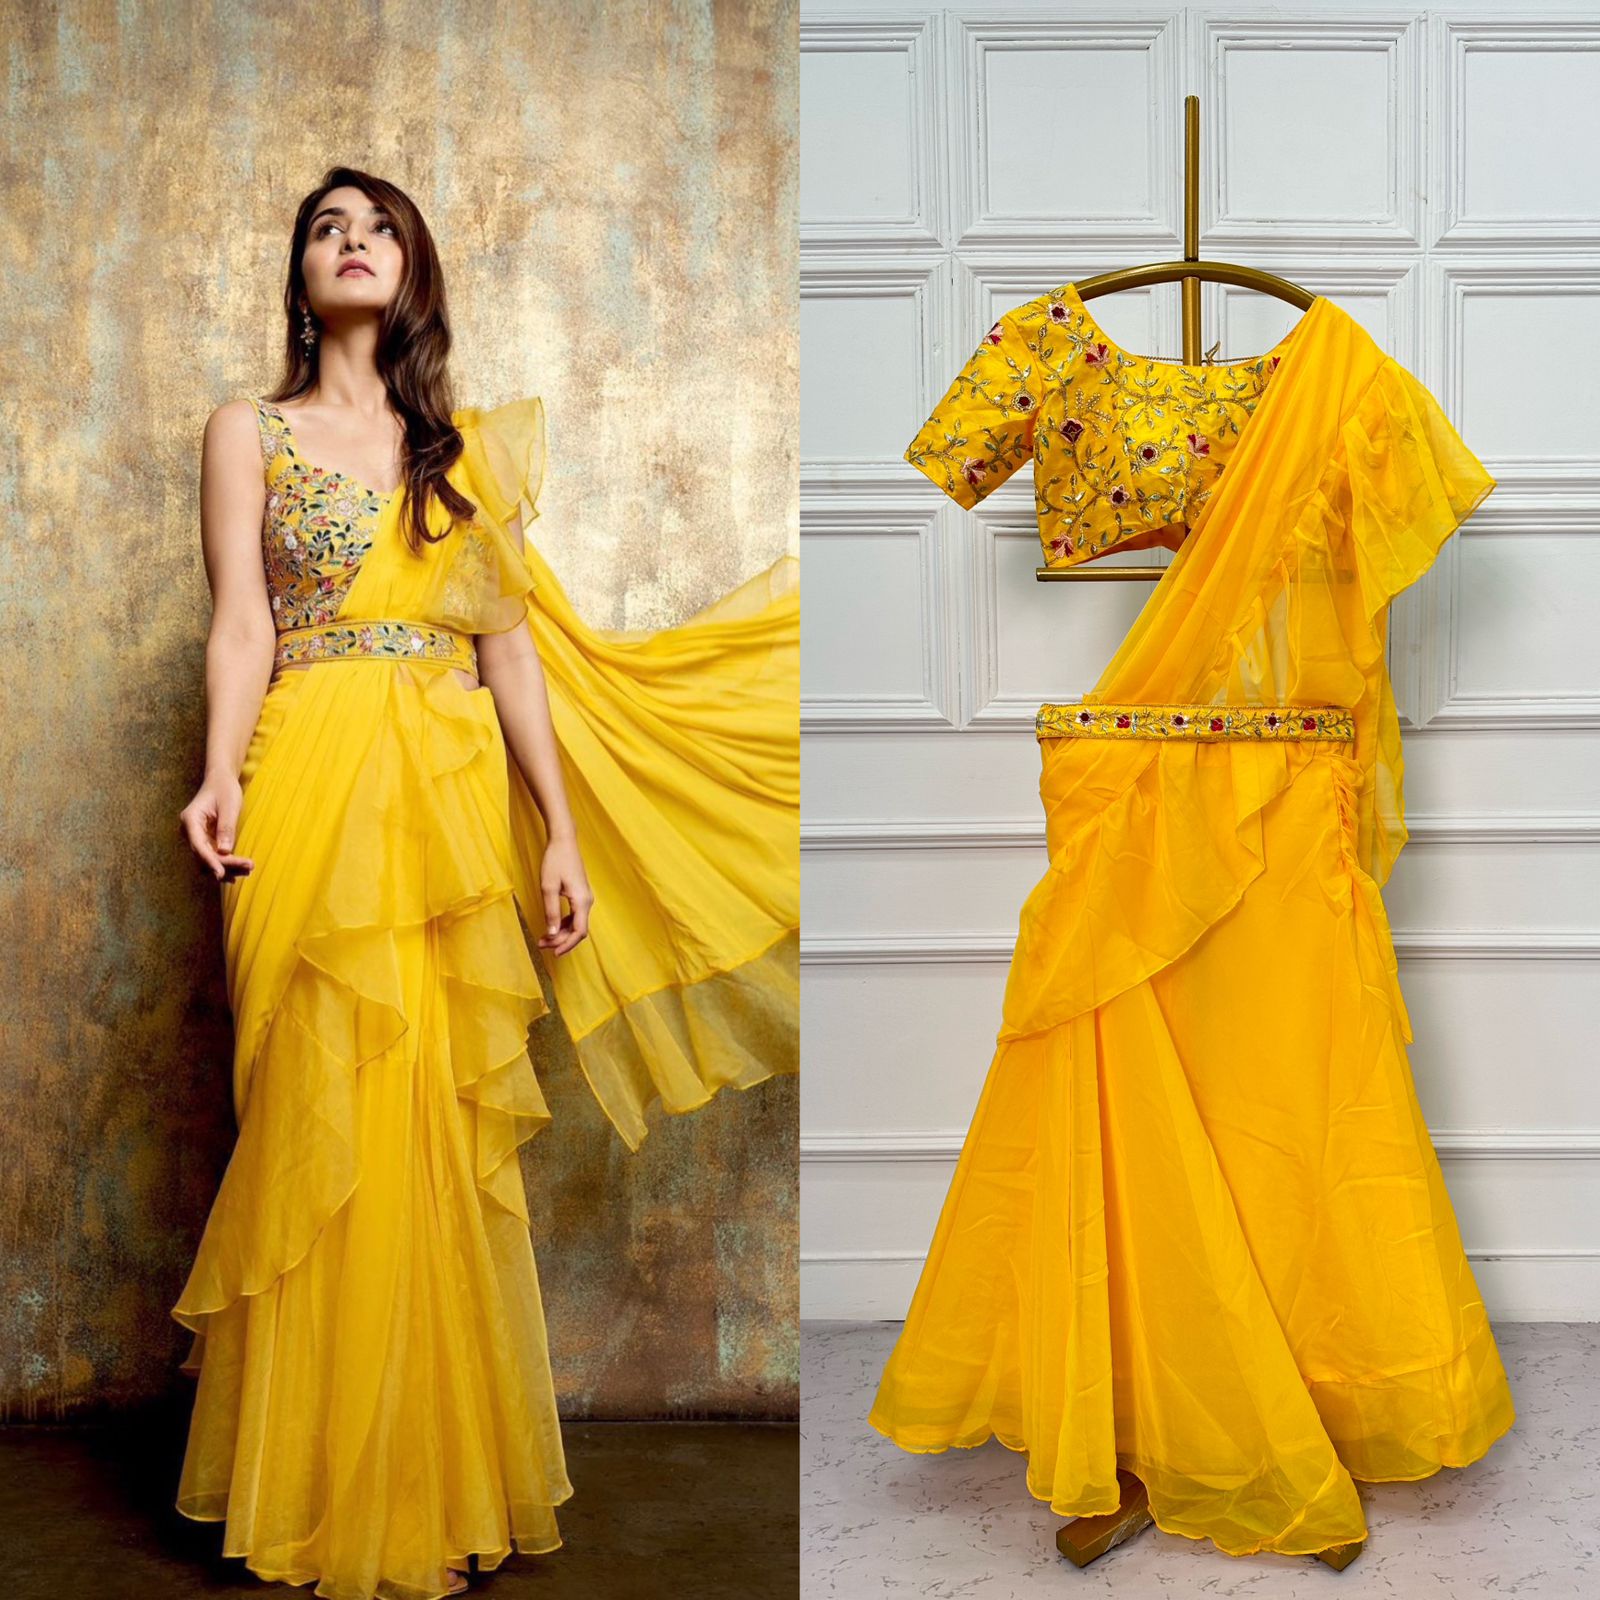 What should I wear in my sister's wedding a lehenga, saree, or gown? - Quora